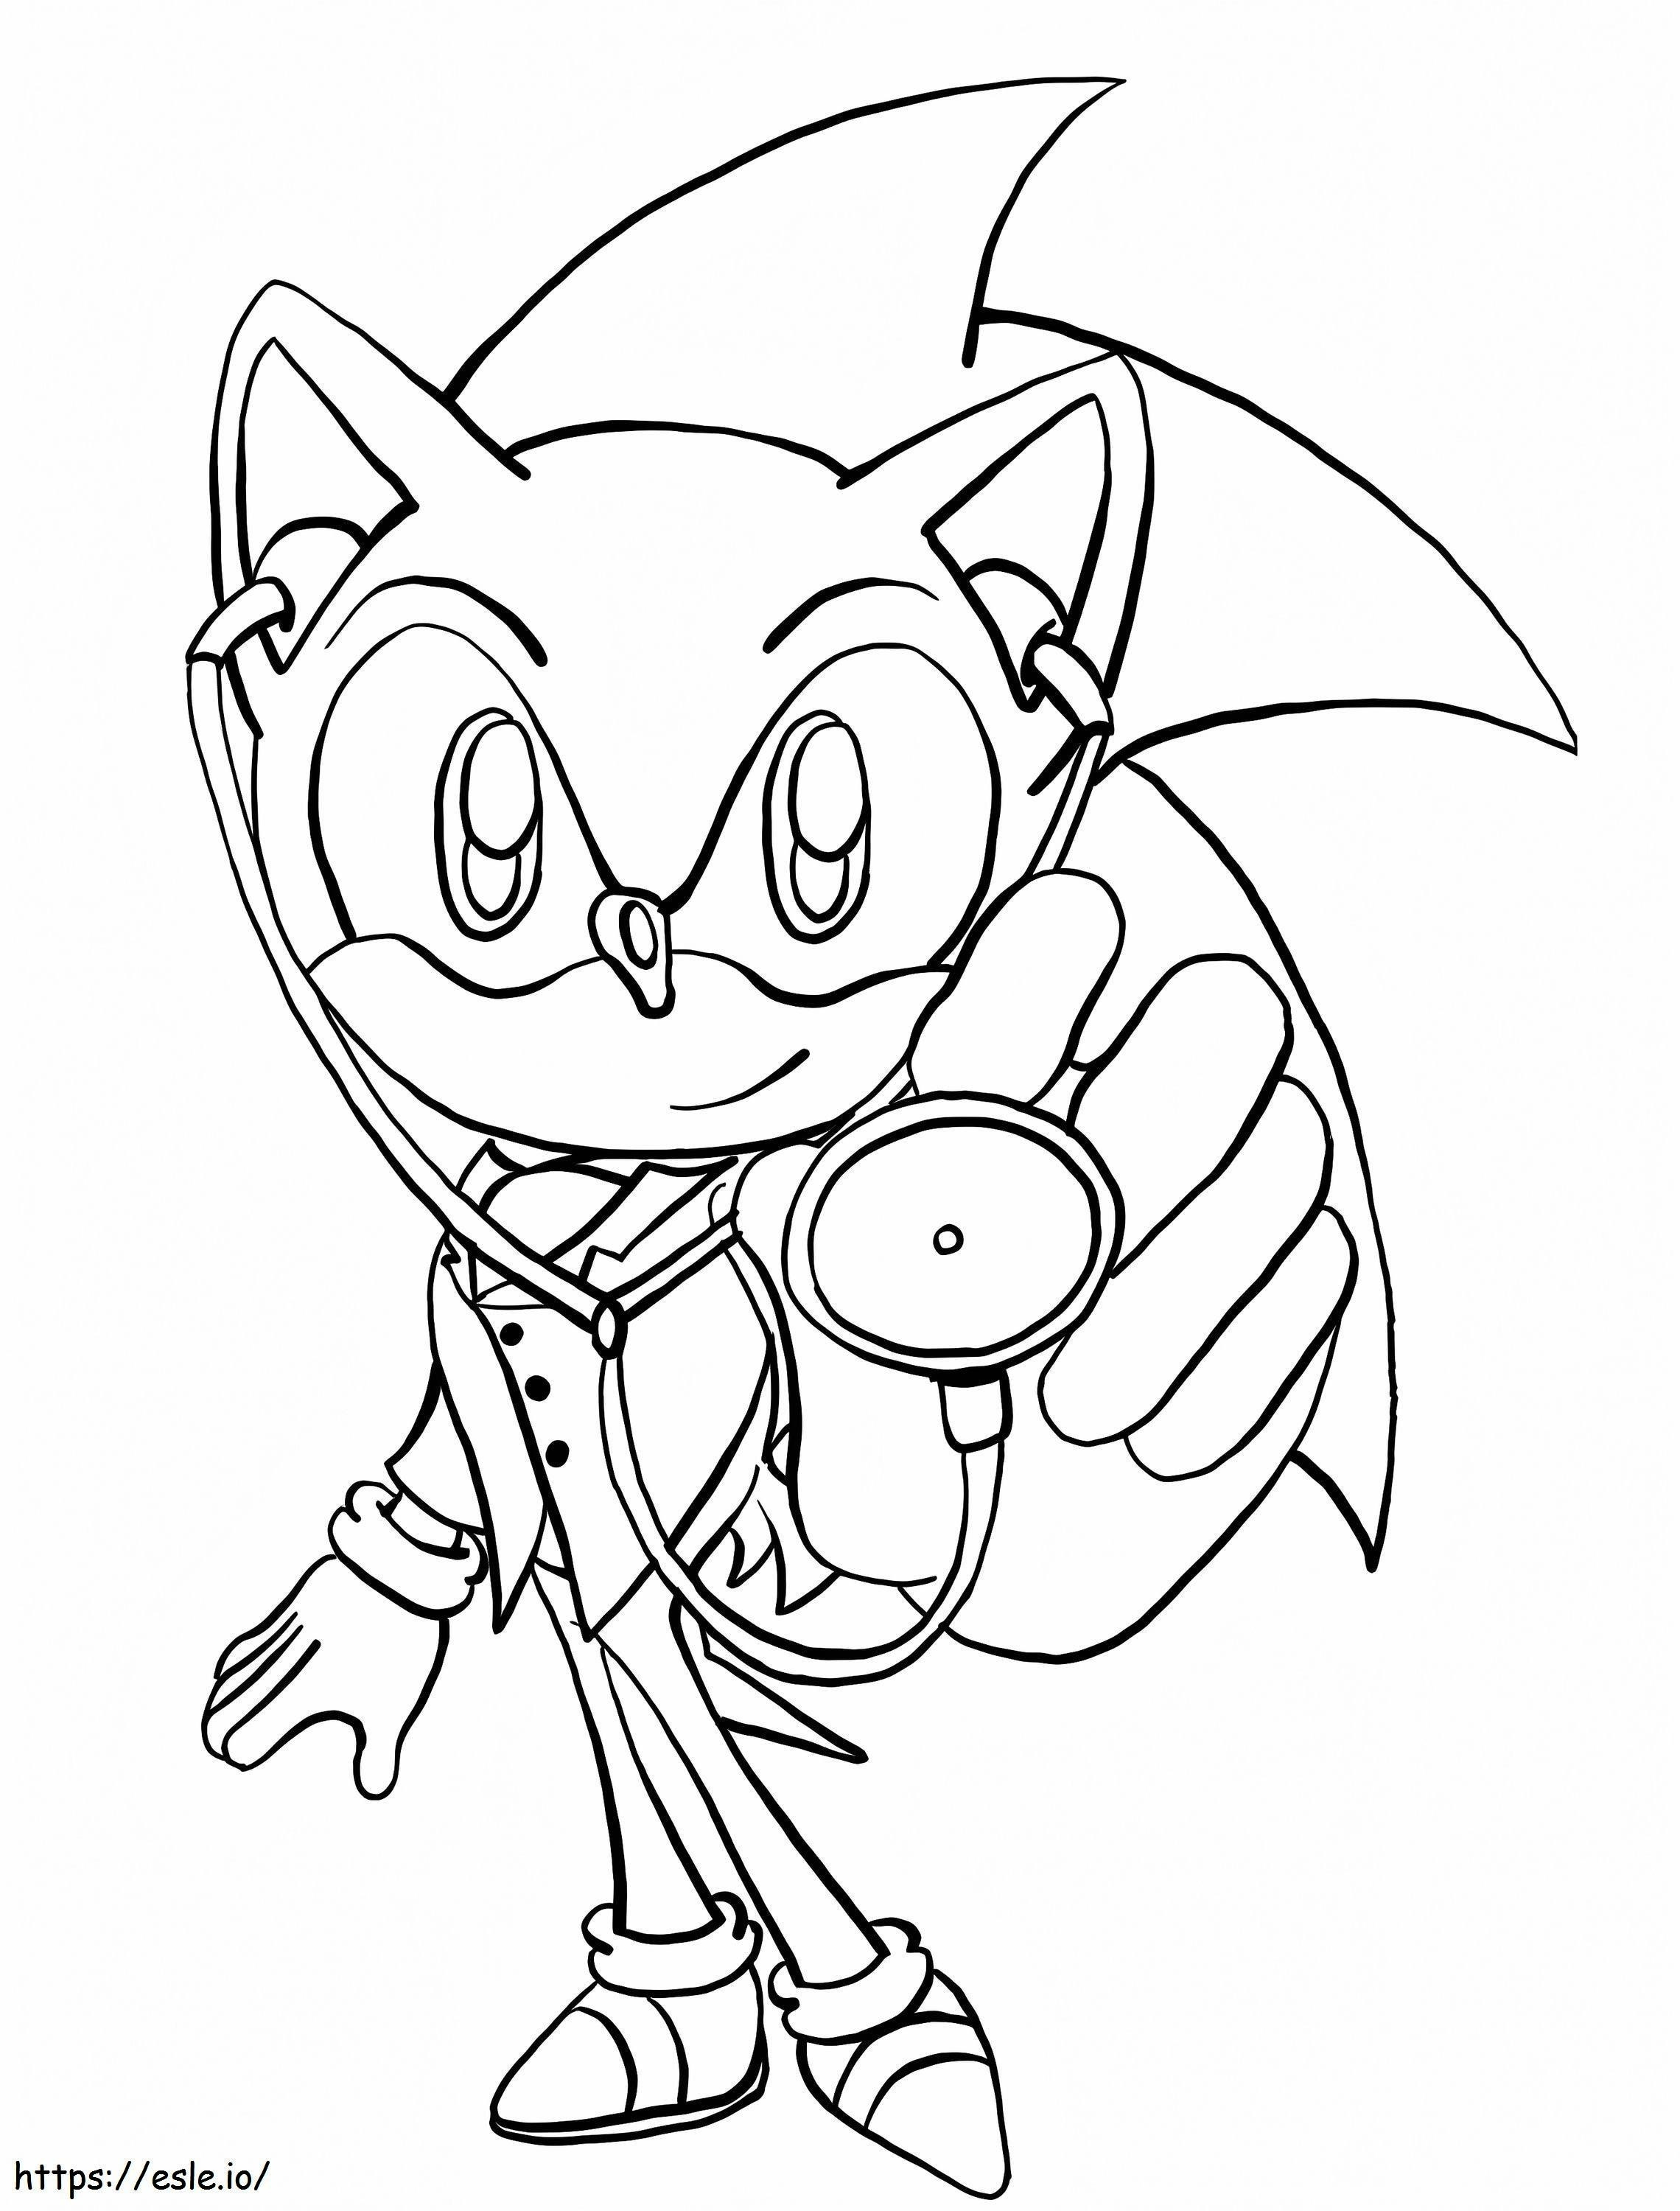 Adorable Sonic coloring page